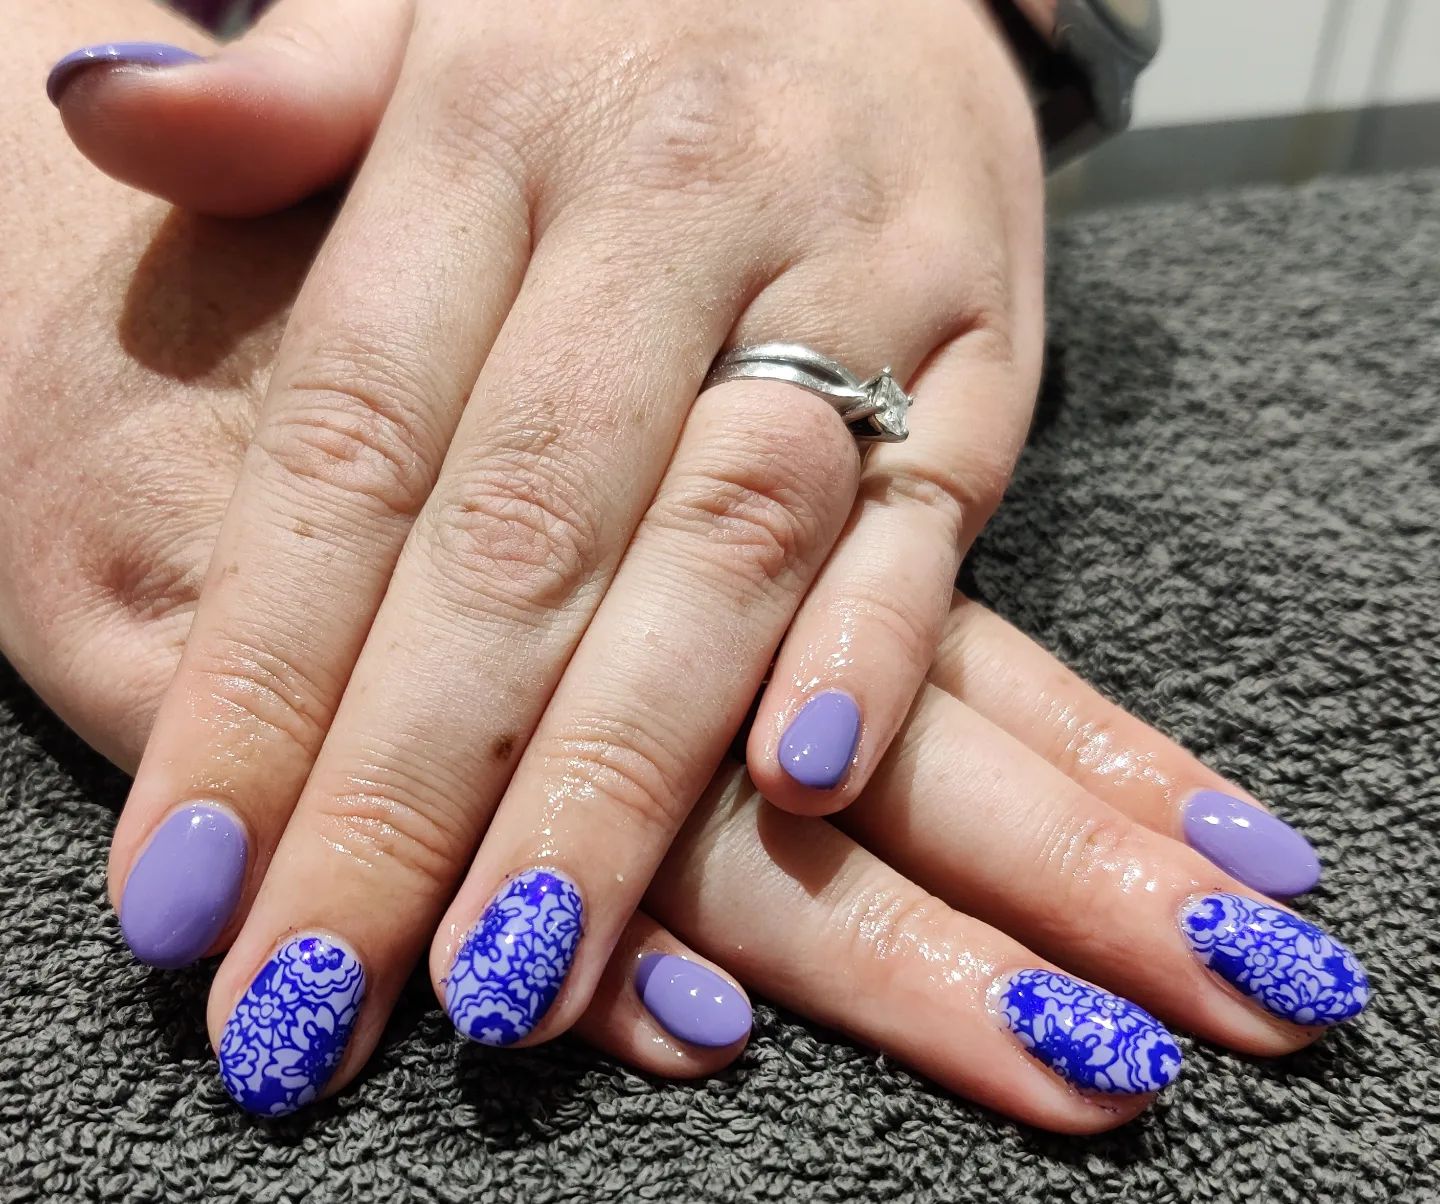 Light purple floral nails are a great way to add some color and pattern to your nails without getting too crazy. If you don't want a very subtle one, we suggest you to apply floral nail art to your accent nails. You will rock with these oval nails.